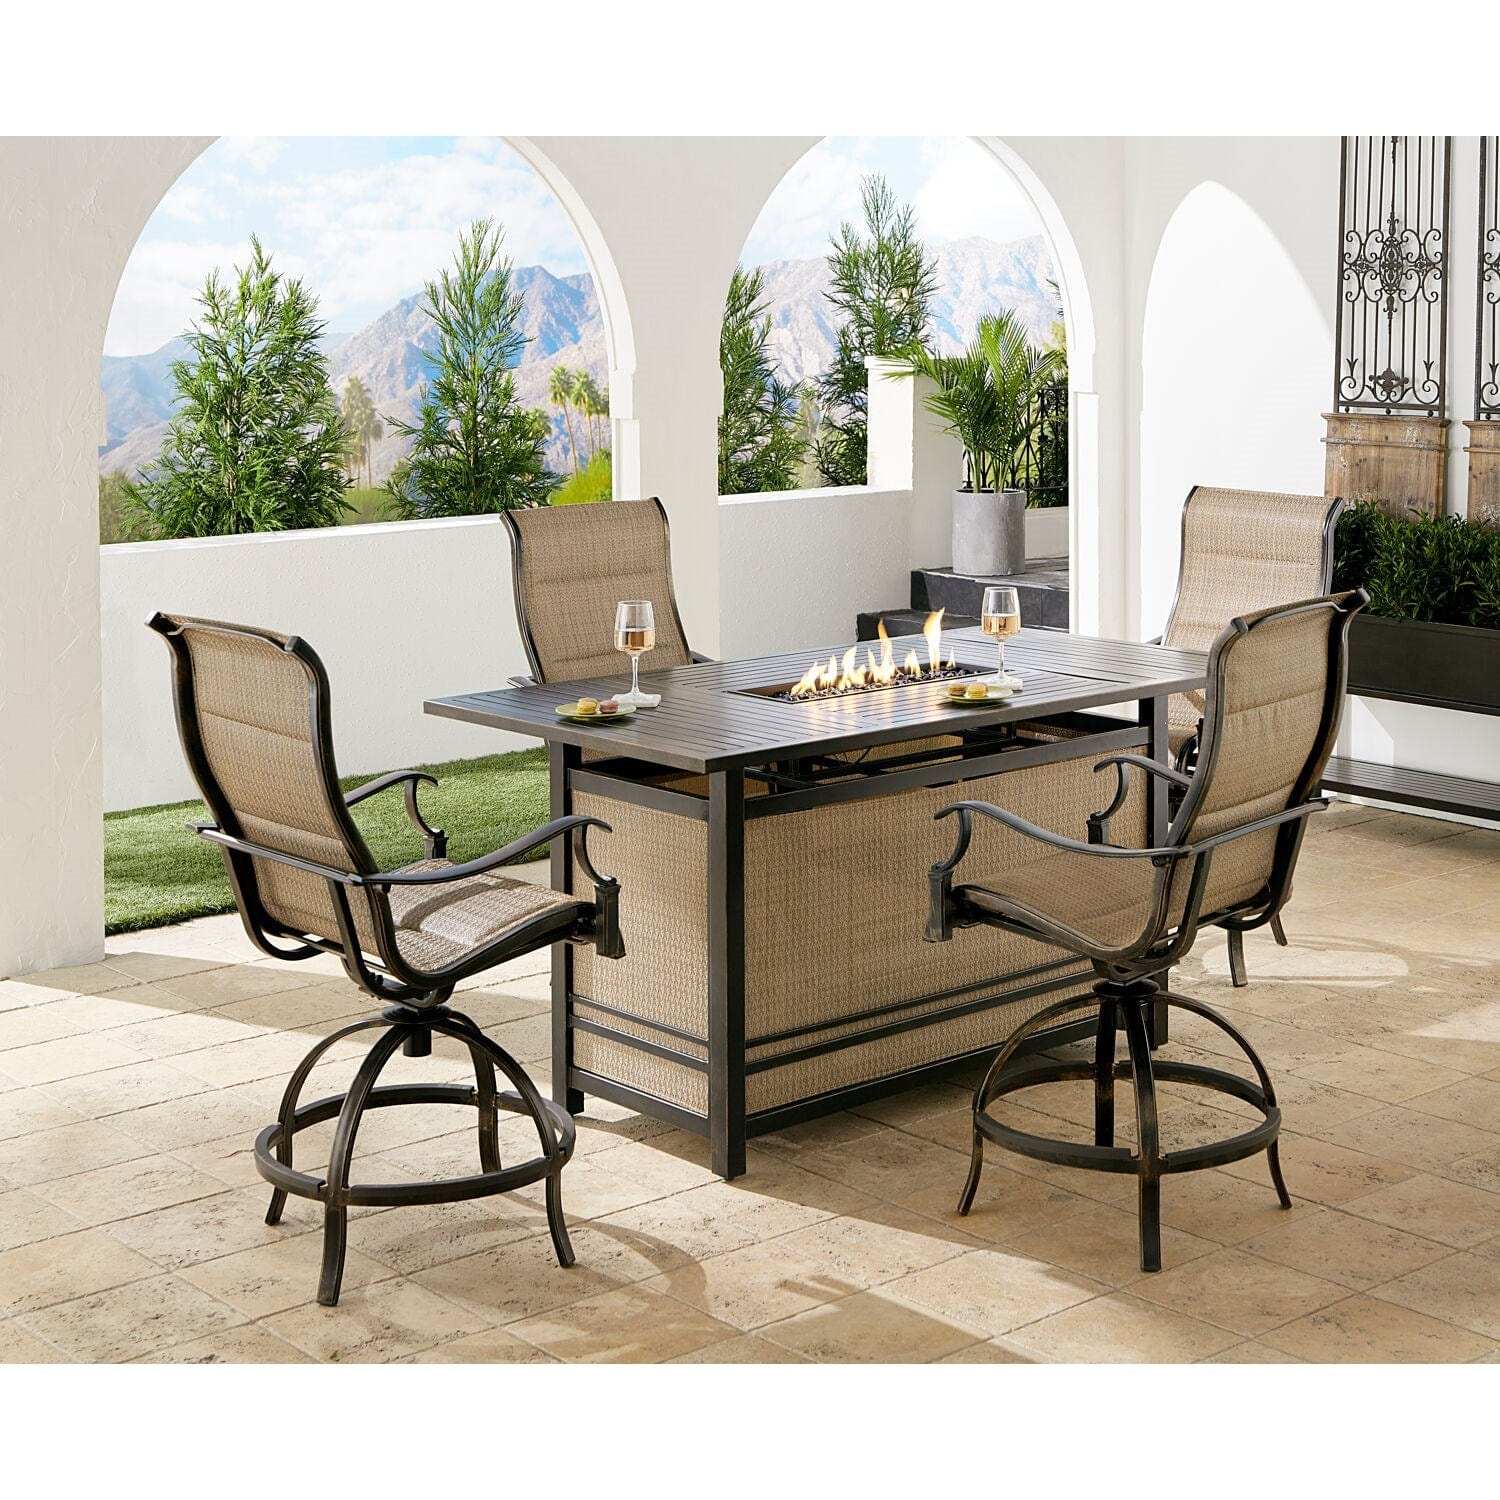 Hanover Fire Pit Dining Set Hanover Traditions 5-Piece High-Dining Set in Tan with 4 Padded Counter-Height Swivel Chairs and a 30,000 BTU Fire Pit Dining Table | TRAD5PCPFPDBR-TAN